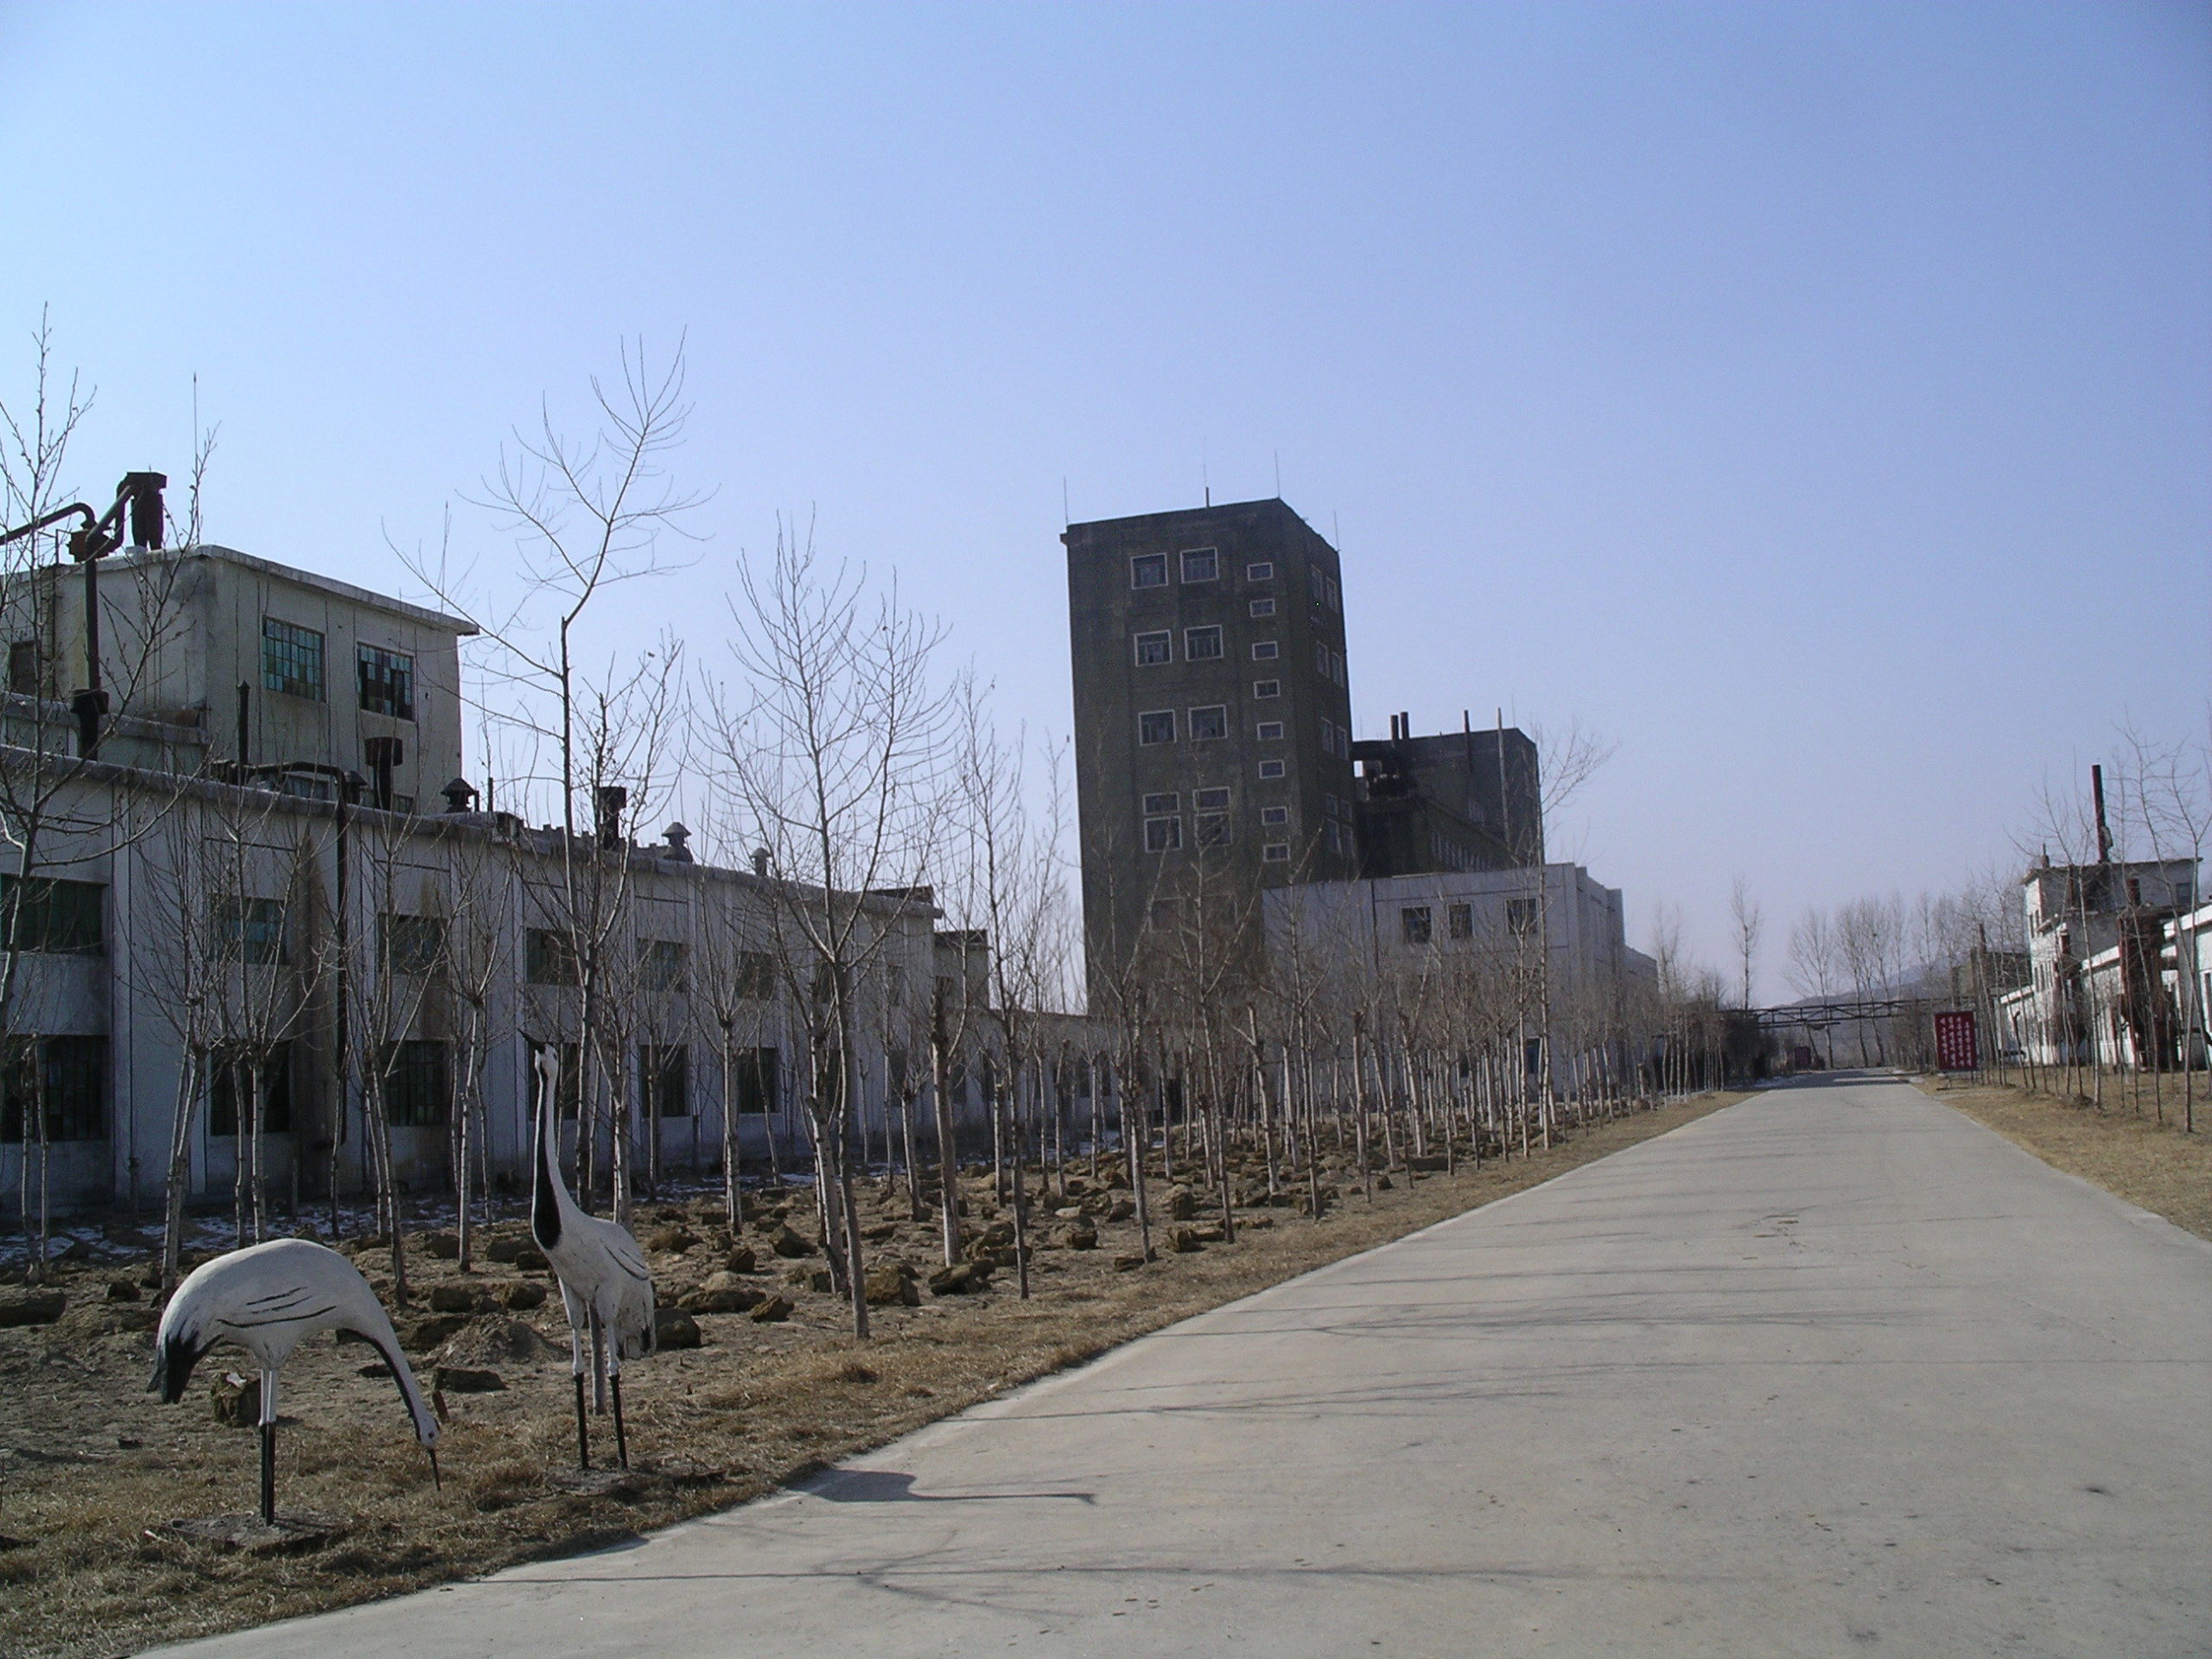 Alley way with newly planted trees and sculpture cranes leading to an industrial rectangular building